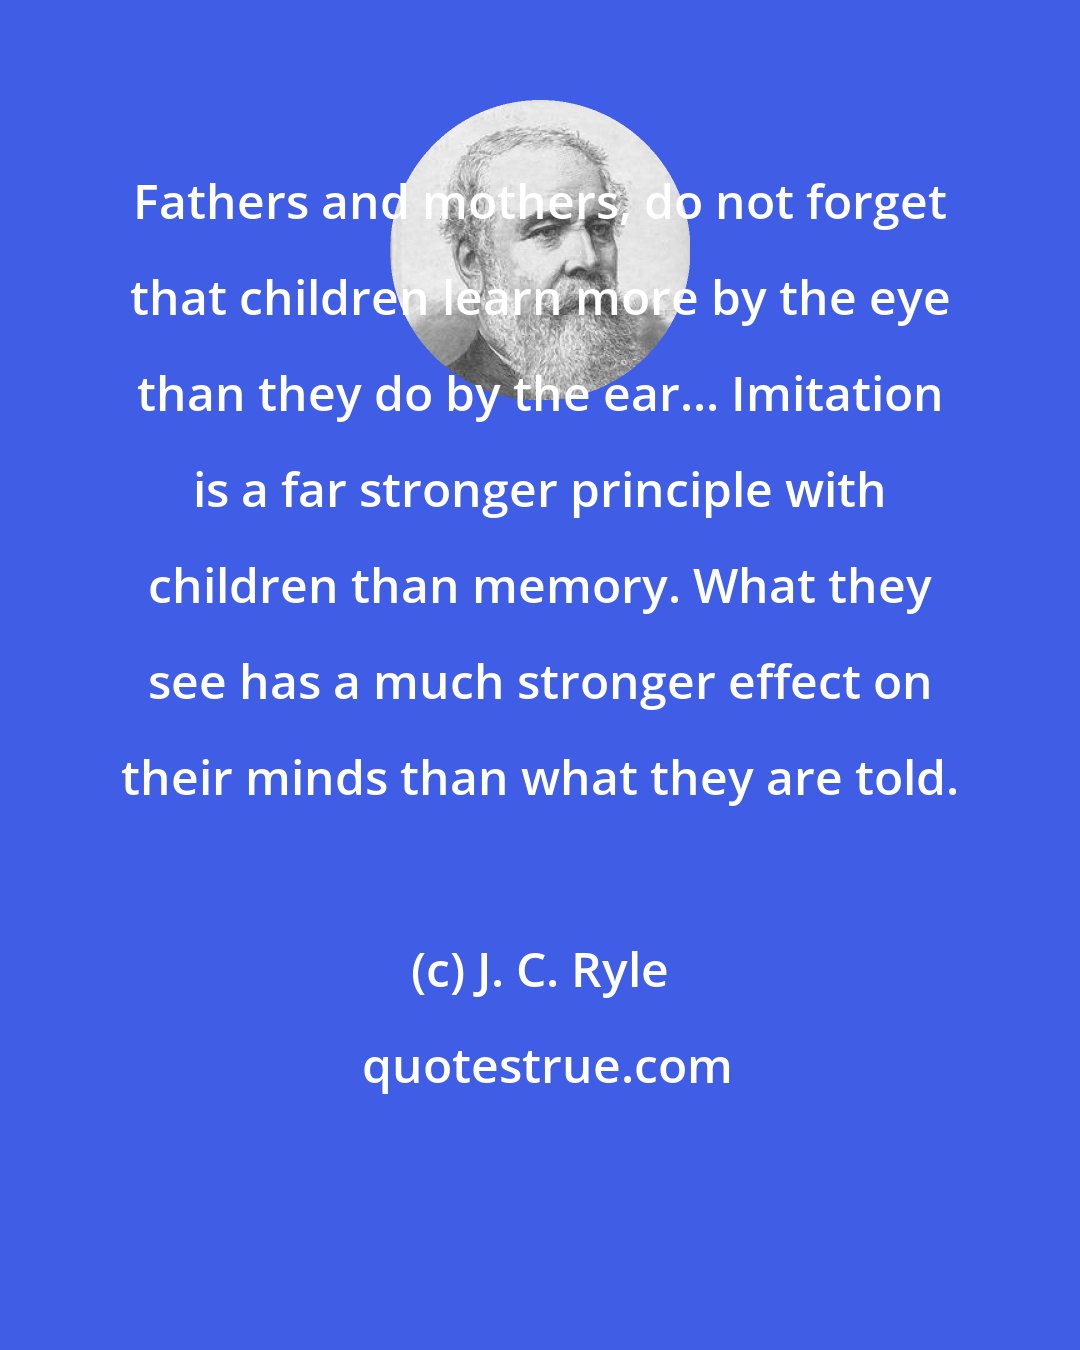 J. C. Ryle: Fathers and mothers, do not forget that children learn more by the eye than they do by the ear... Imitation is a far stronger principle with children than memory. What they see has a much stronger effect on their minds than what they are told.